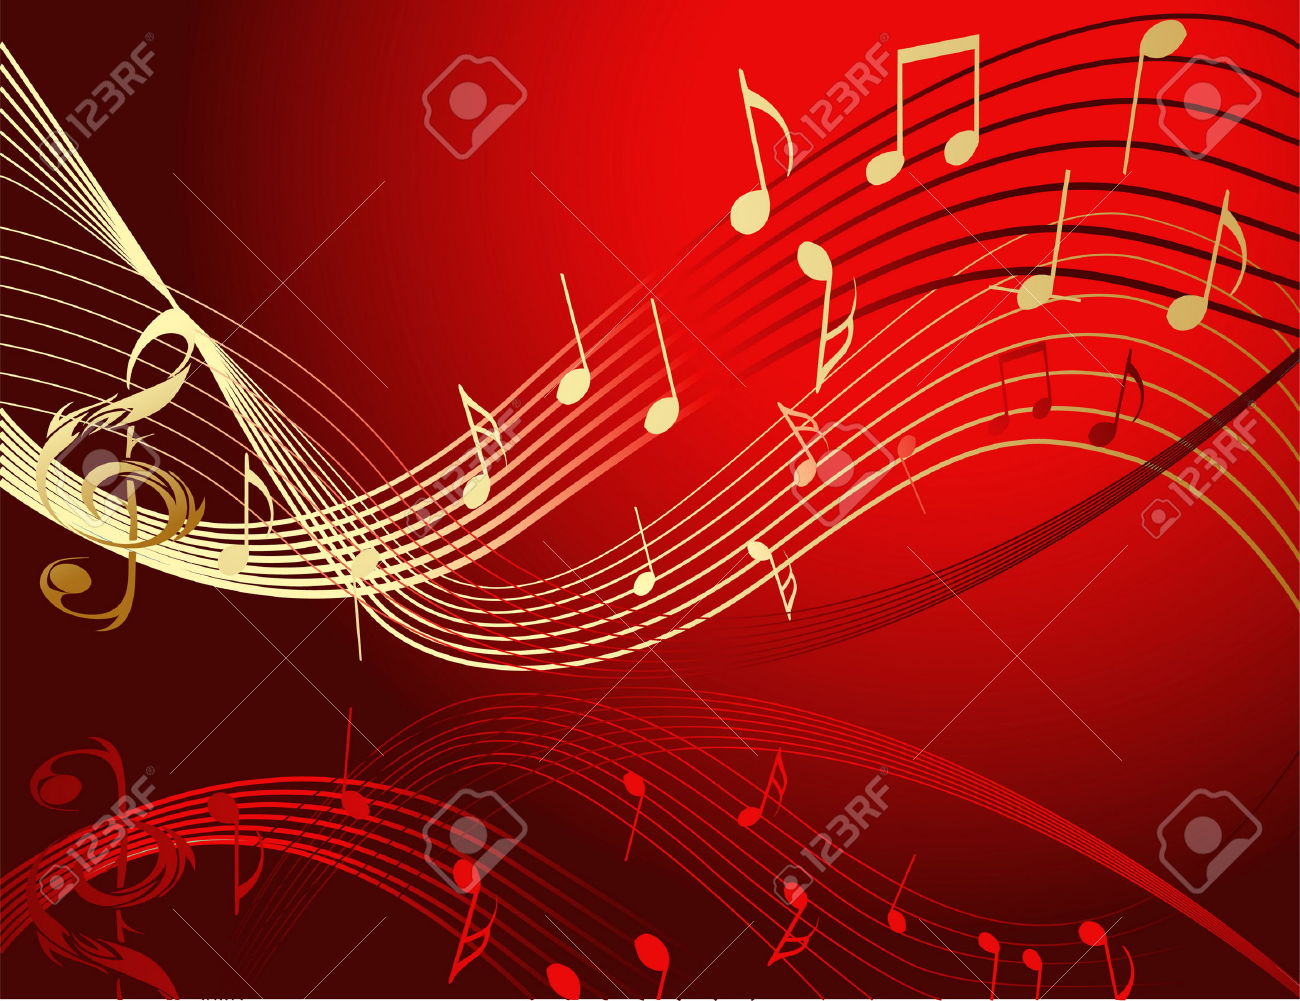 royalty free music free download background music